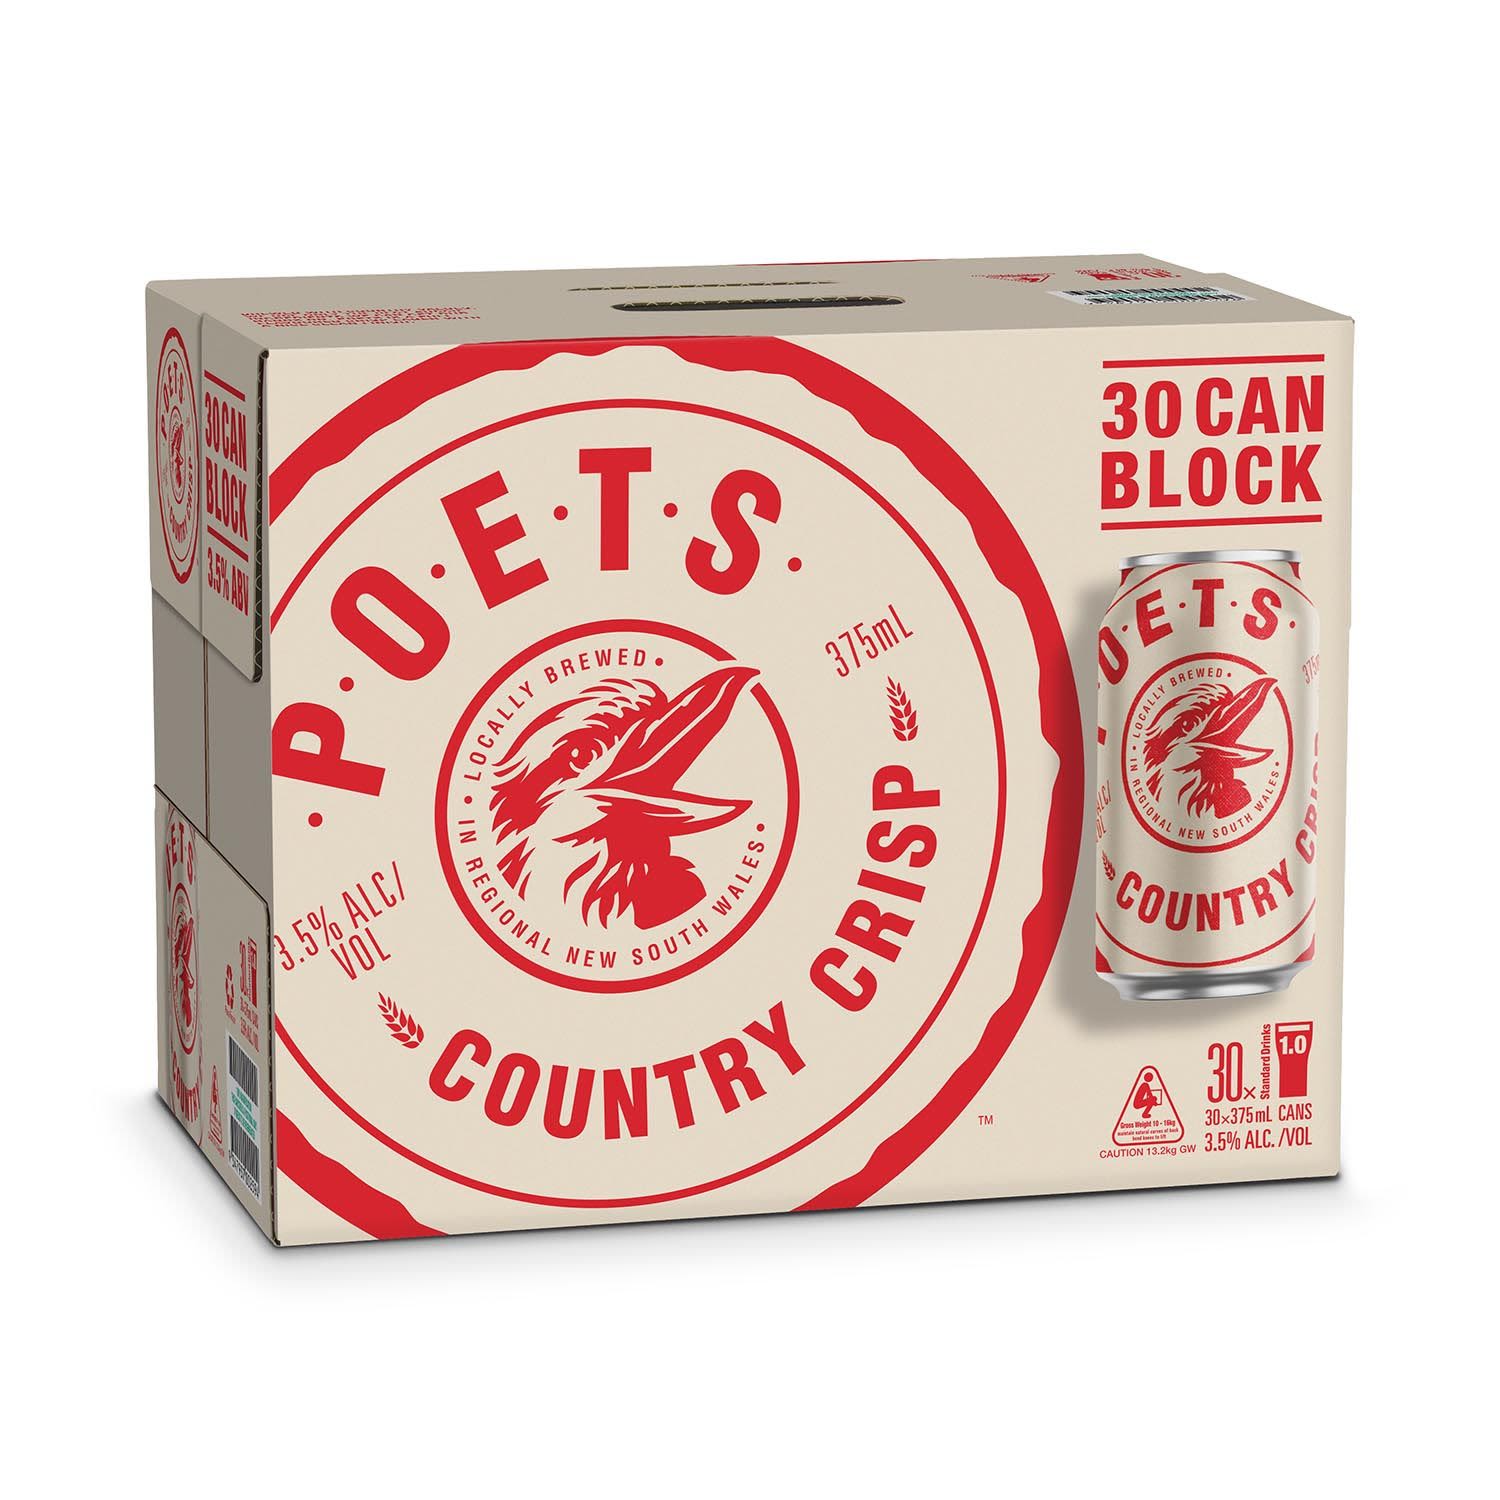 Poets Country Crisp Mid Can 375mL 30 Pack